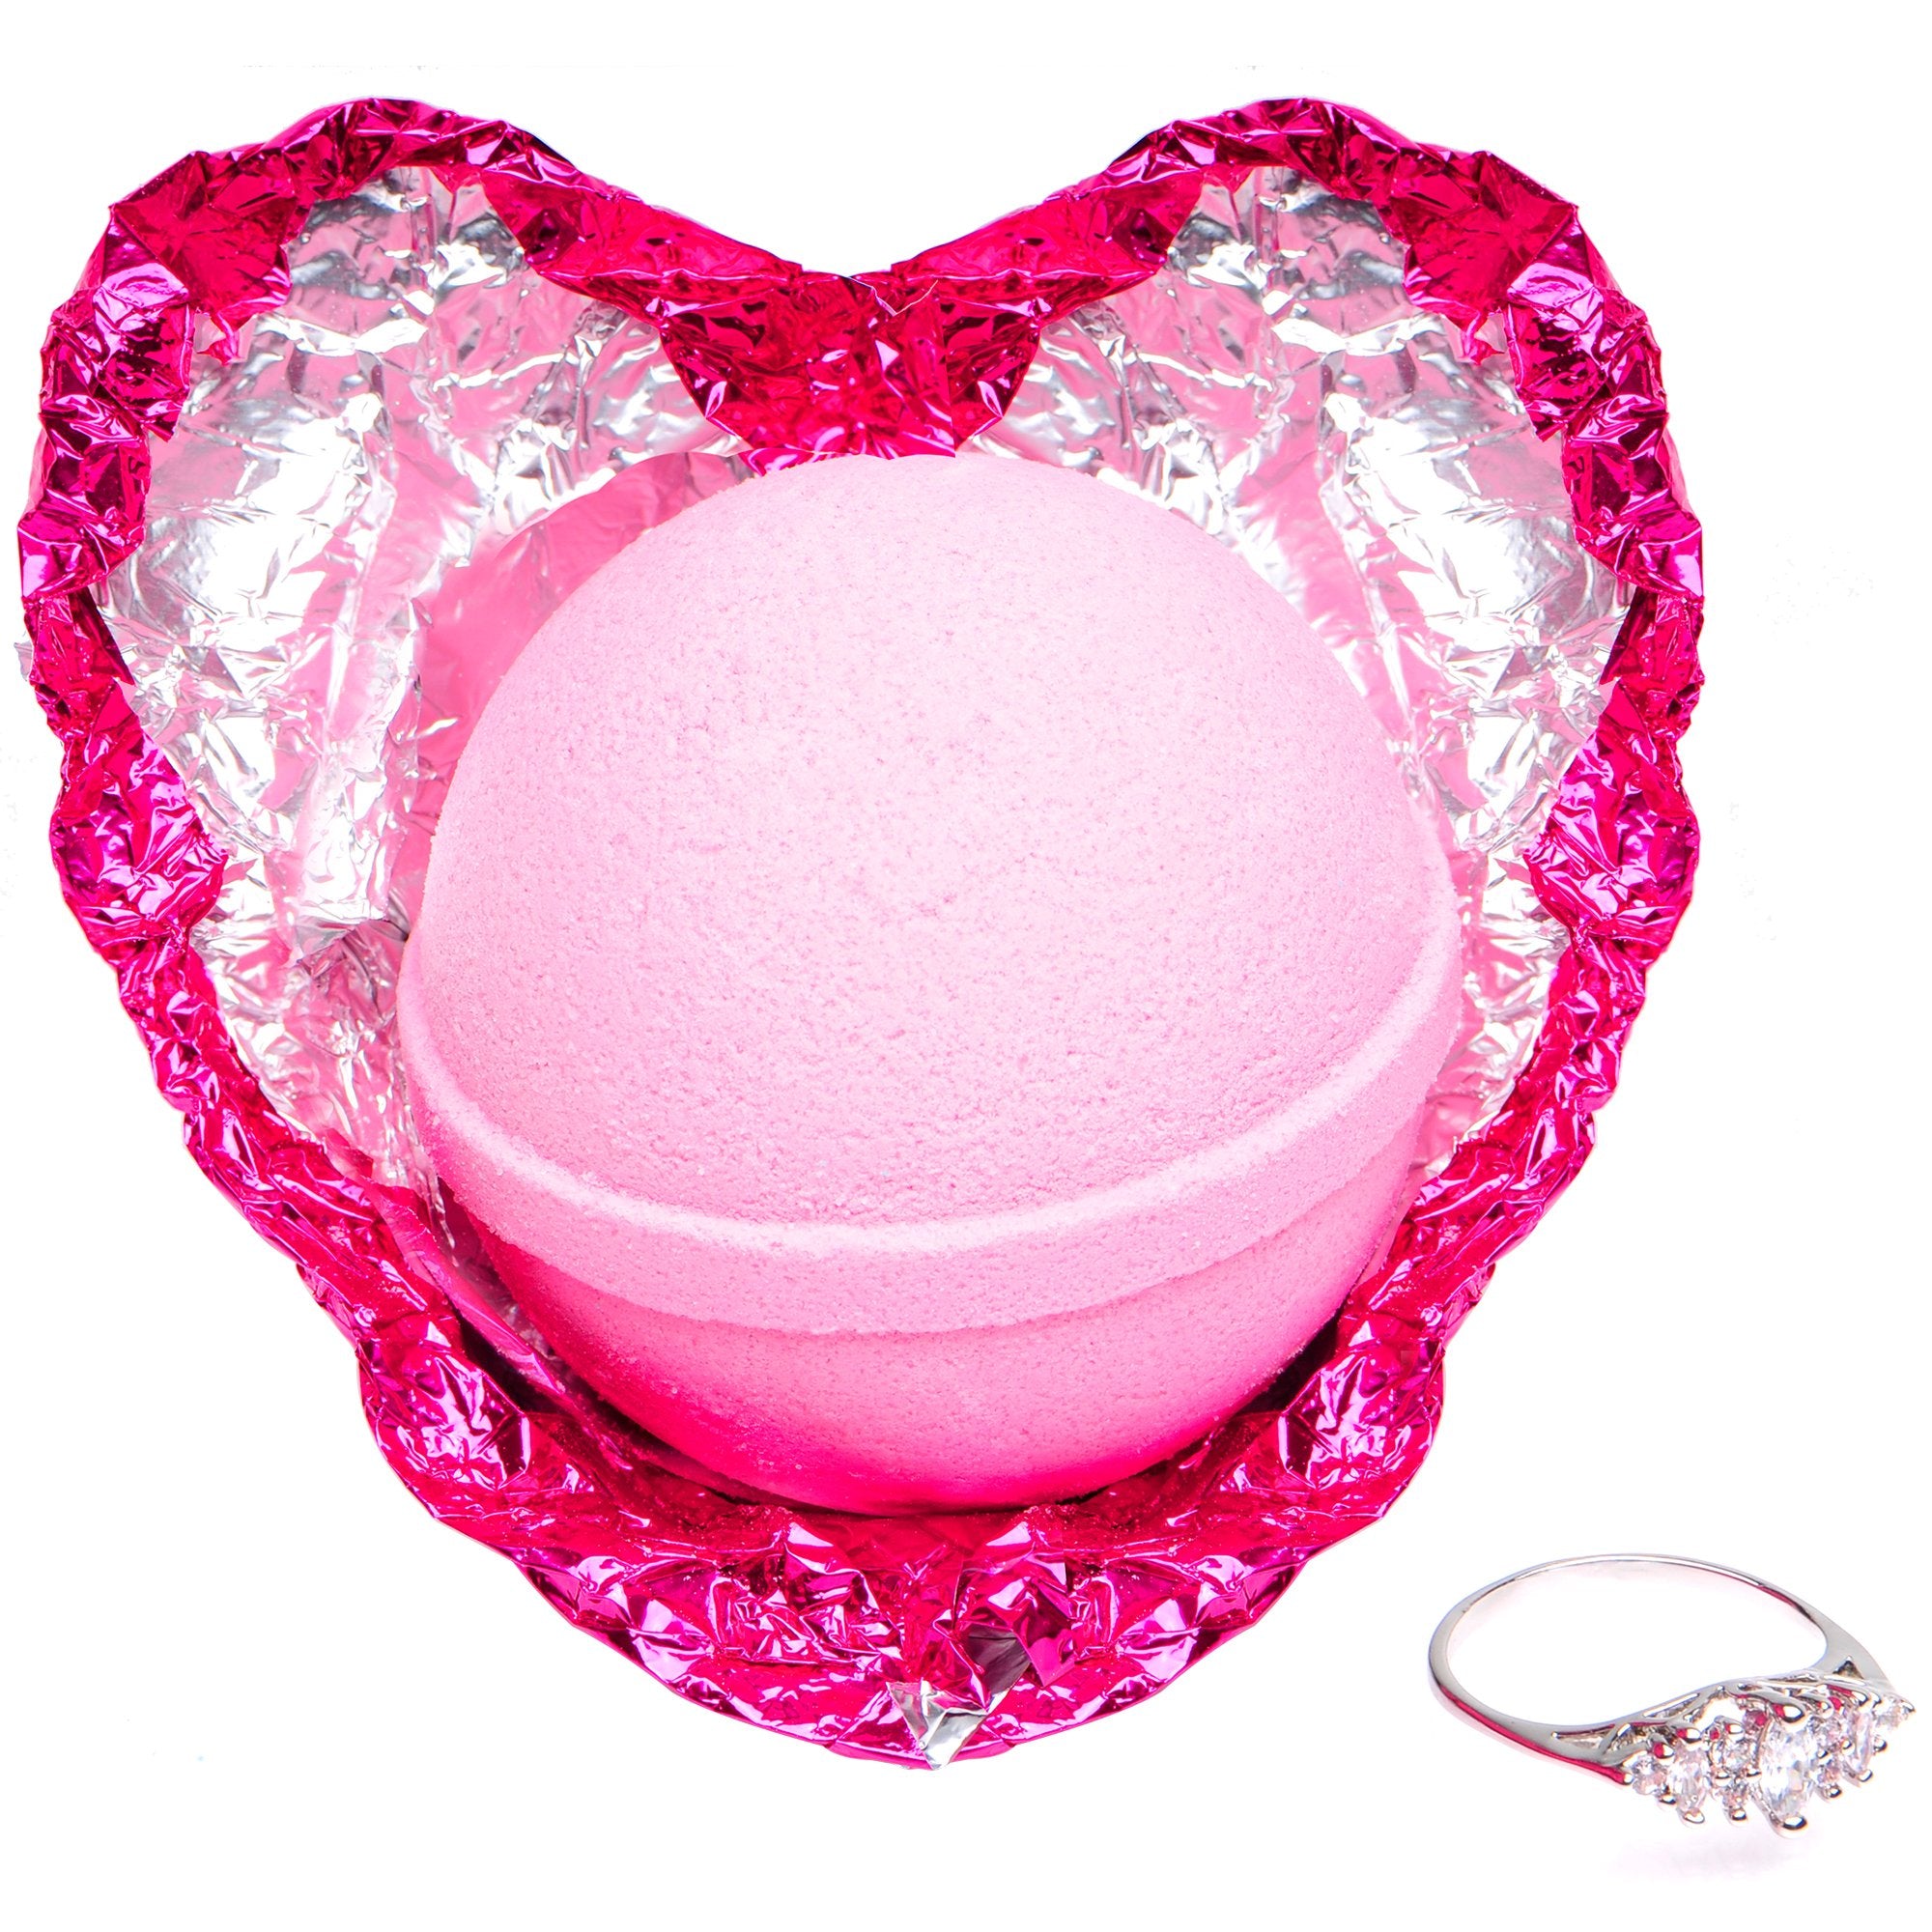 Love Potion Bath Bomb with Jewelry Ring Inside